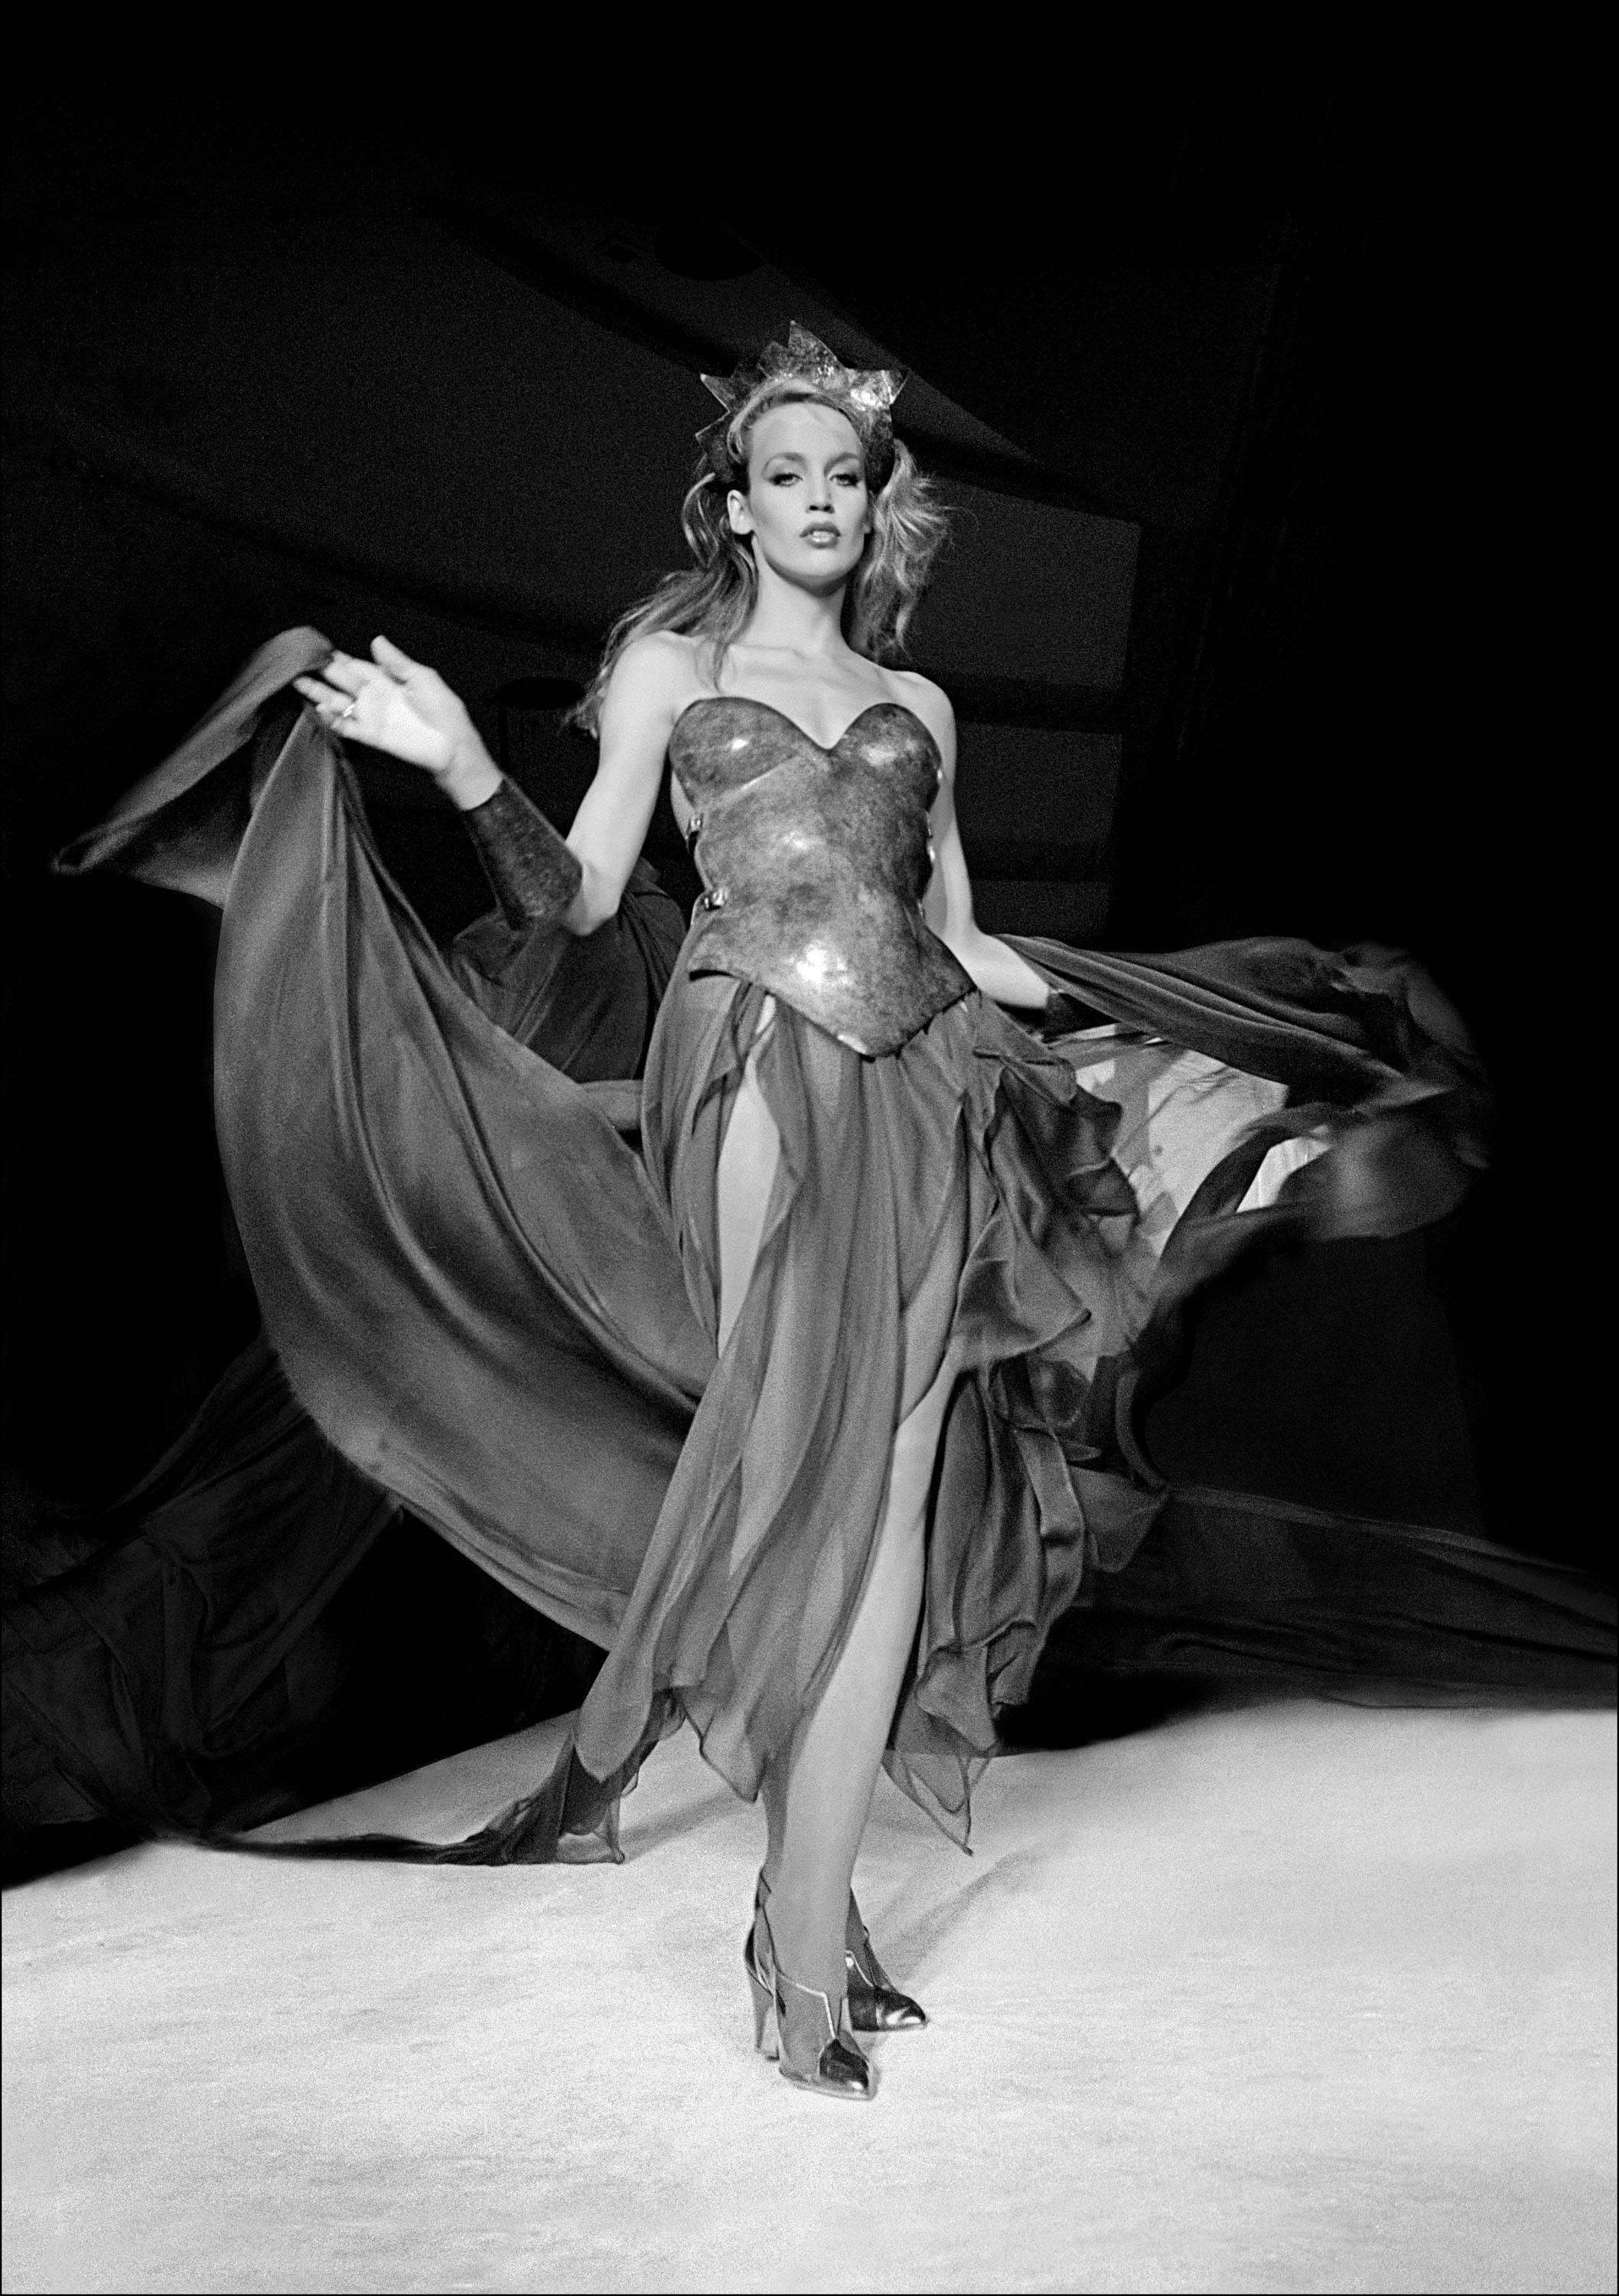 Allan Tannenbaum Black and White Photograph - Jerry Hall models Thierry Mugler, 1980